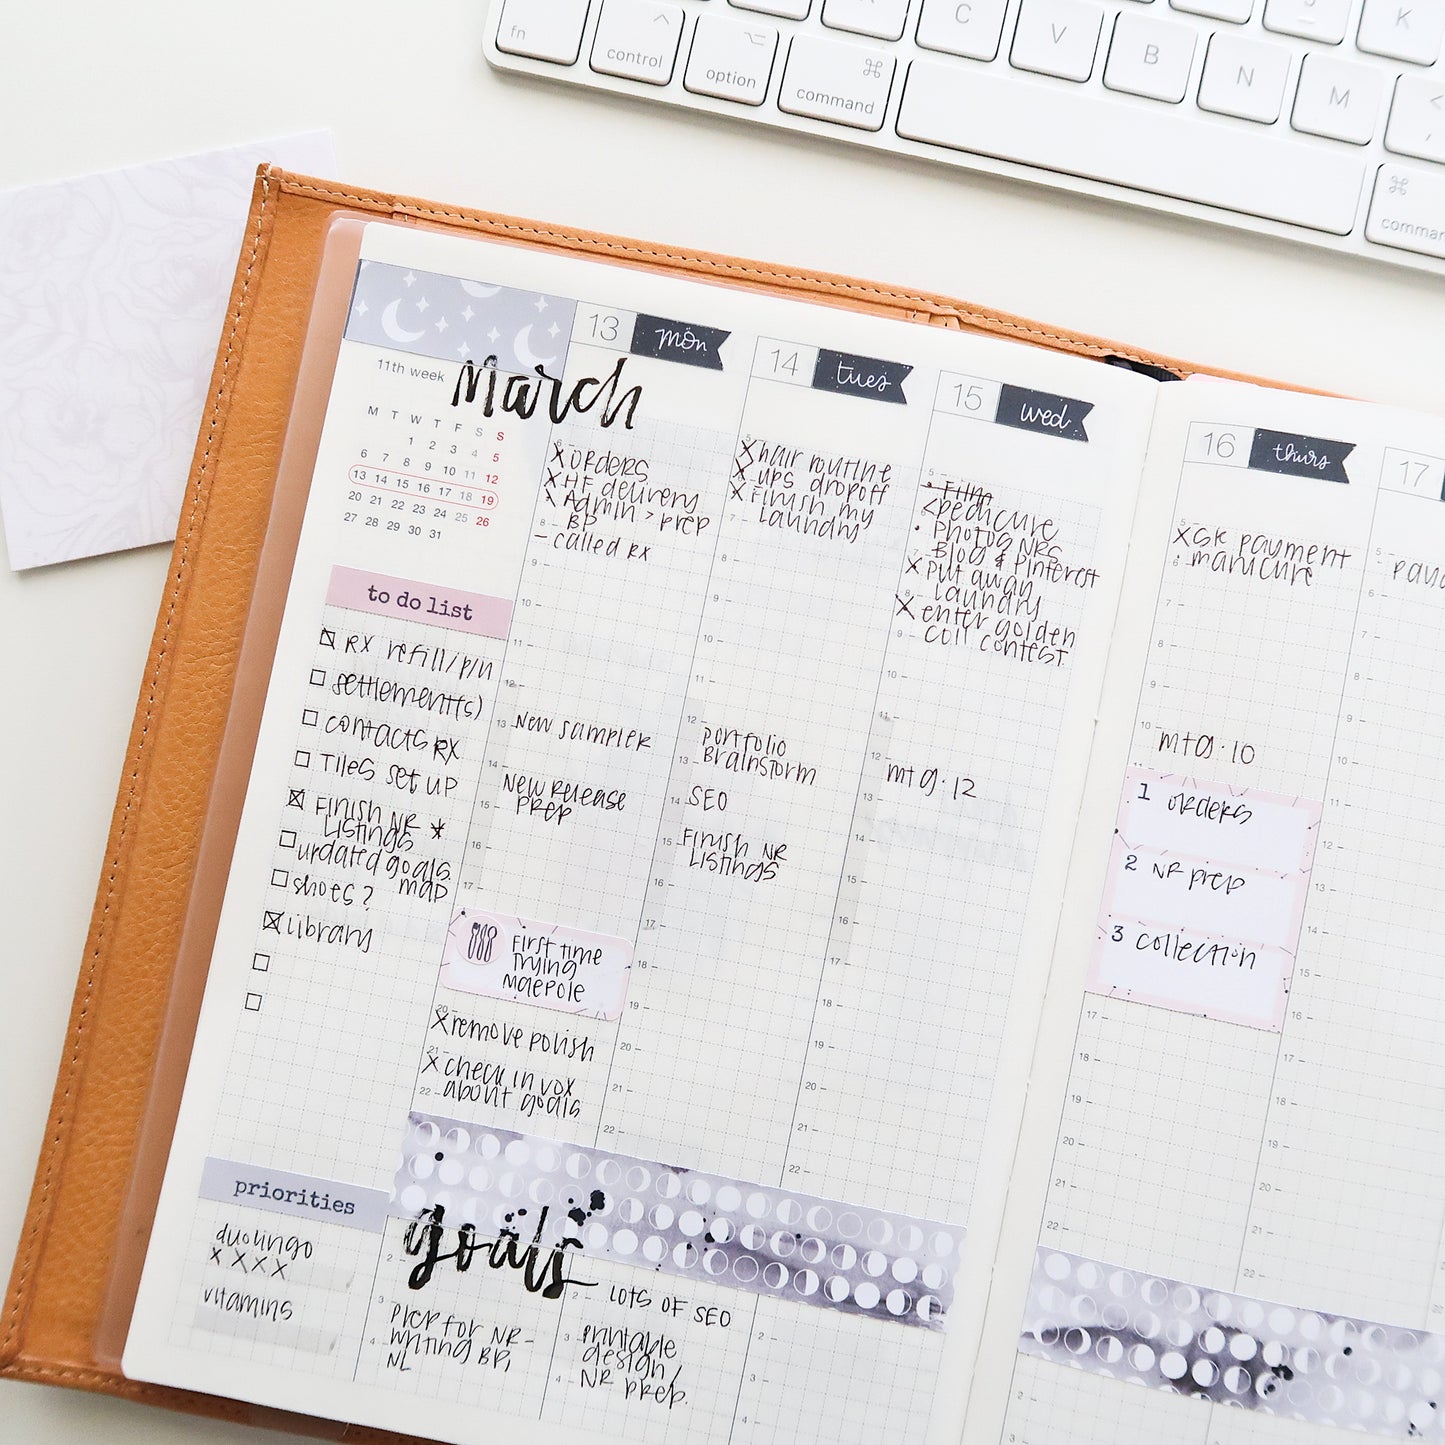 Printable Hobonichi Cousin Weekly Planner Stickers - Luna